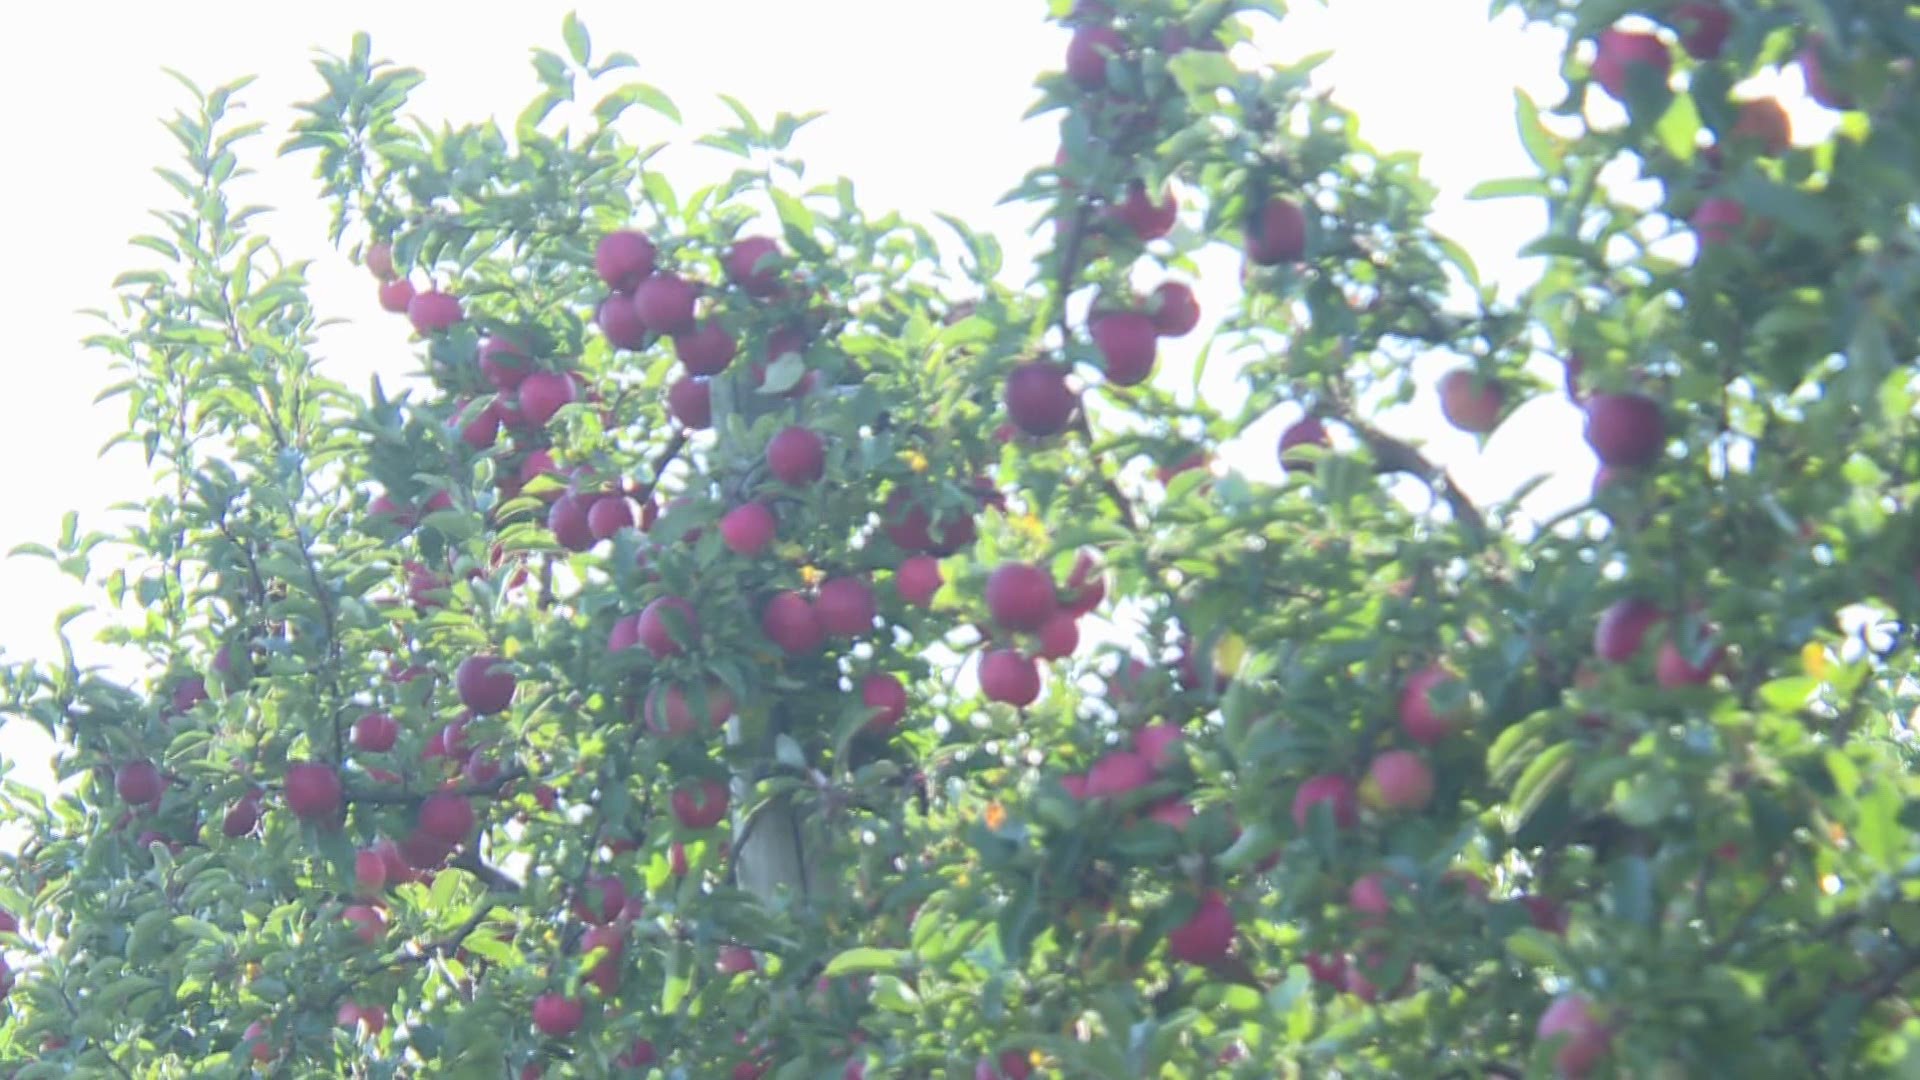 A few more bad apples -- that is what farmers are prepping for as our climate continues to change.